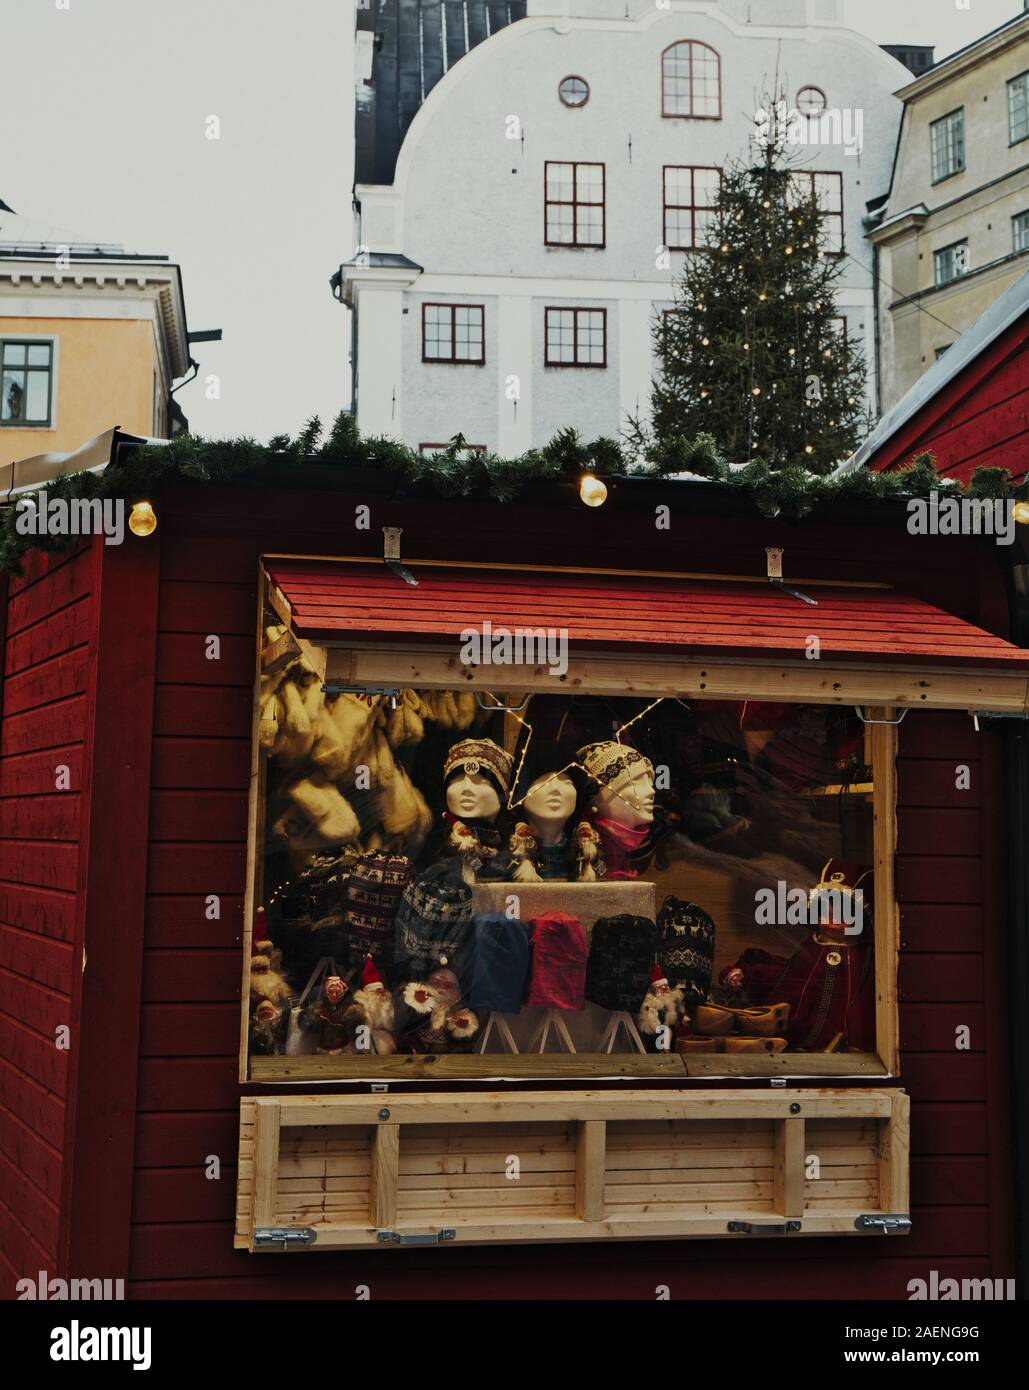 Display of winter woollen hats and scarves for sale, Christmas Market, Stortorget, Gamla Stan (Stockholm's old town), Stockholm, Sweden, Scandinavia Stock Photo